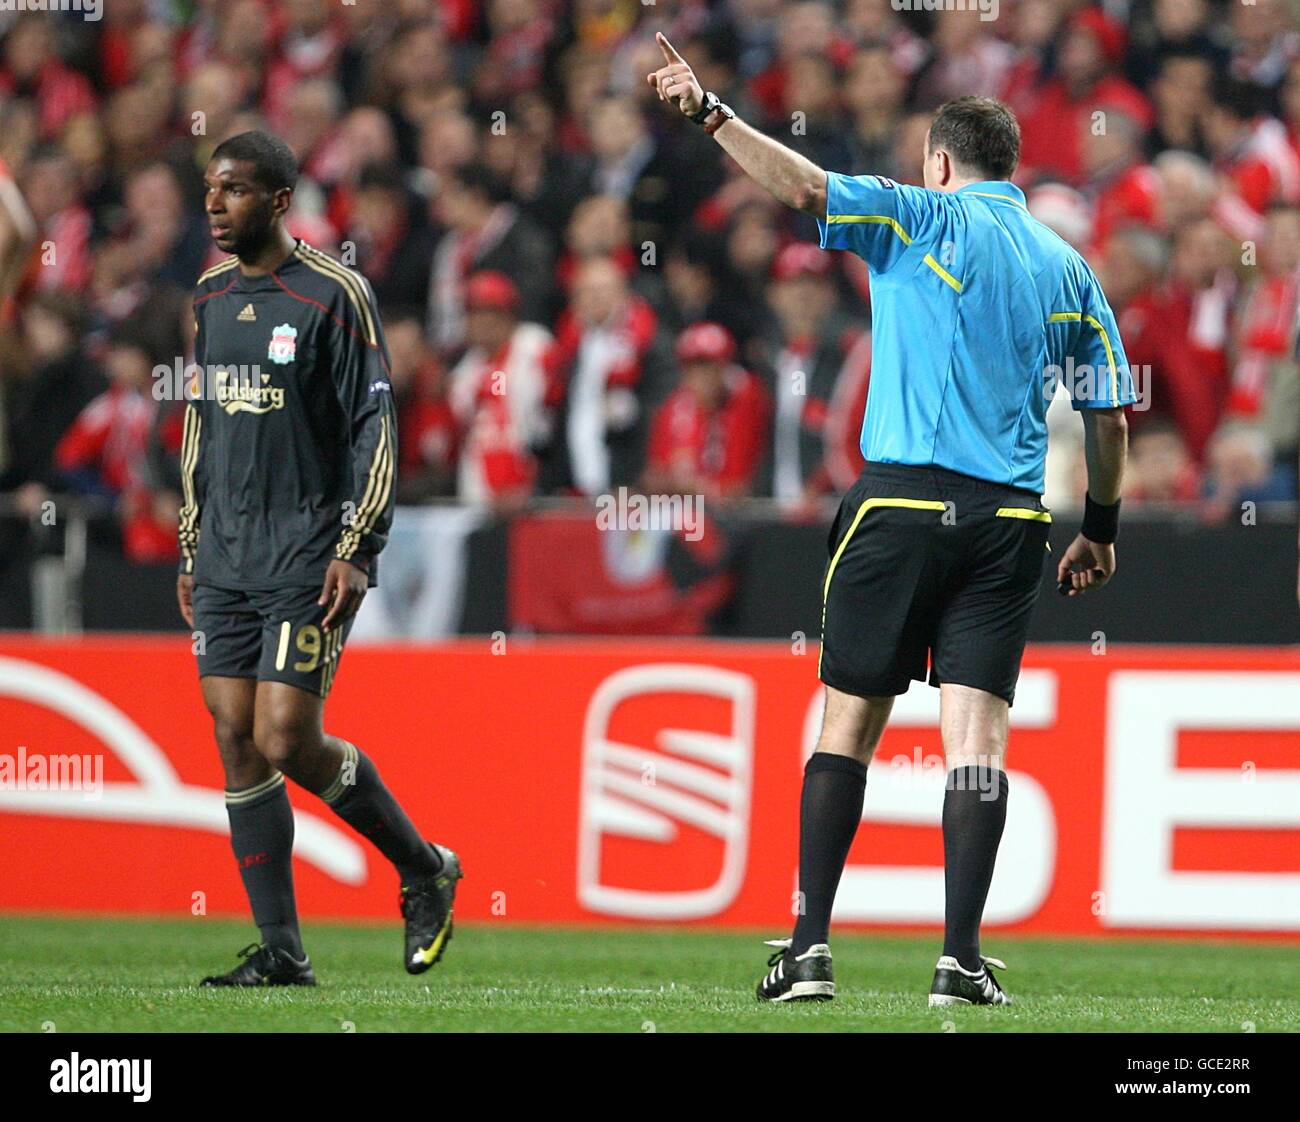 Soccer - UEFA Europa League - Quarter Final - First Leg - Benfica v Liverpool - Stadium of Light. Liverpool's Ryan Babel is pointed off the pitch by referee Jonas Eriksson after being shown a red card Stock Photo